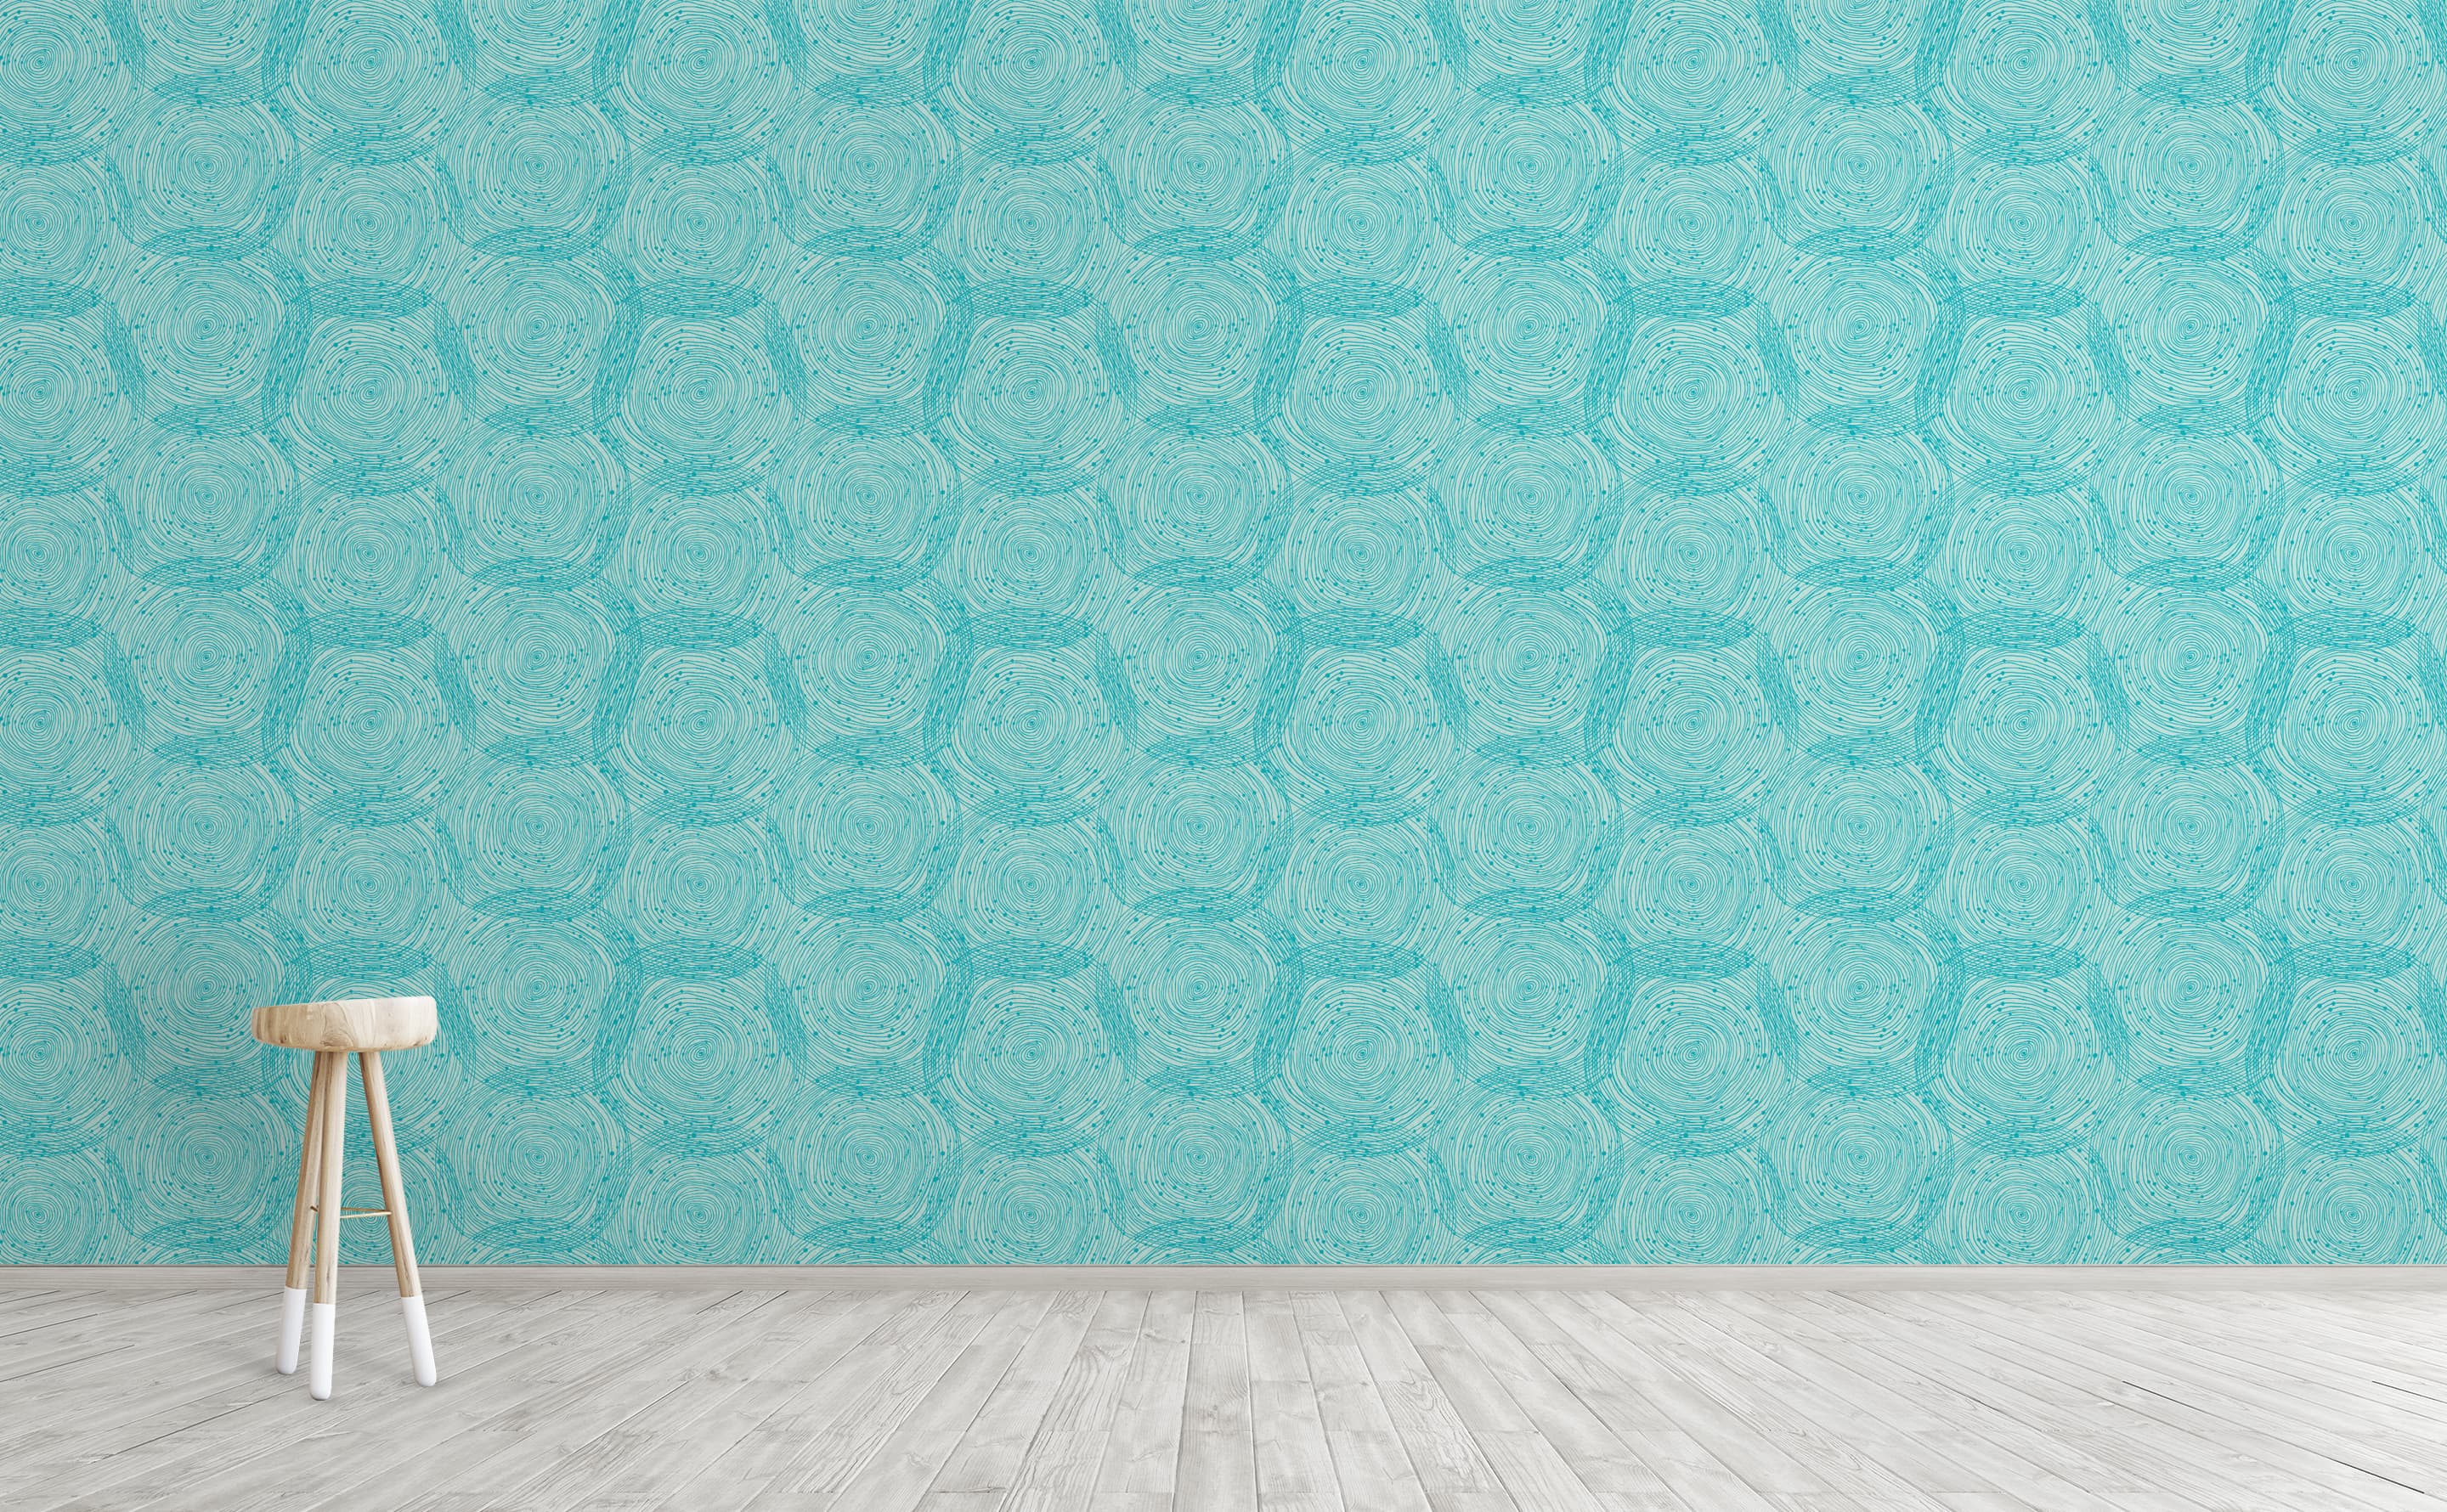 Walls Need Love: Peel and Stick Wallpaper Review (The Good & Bad